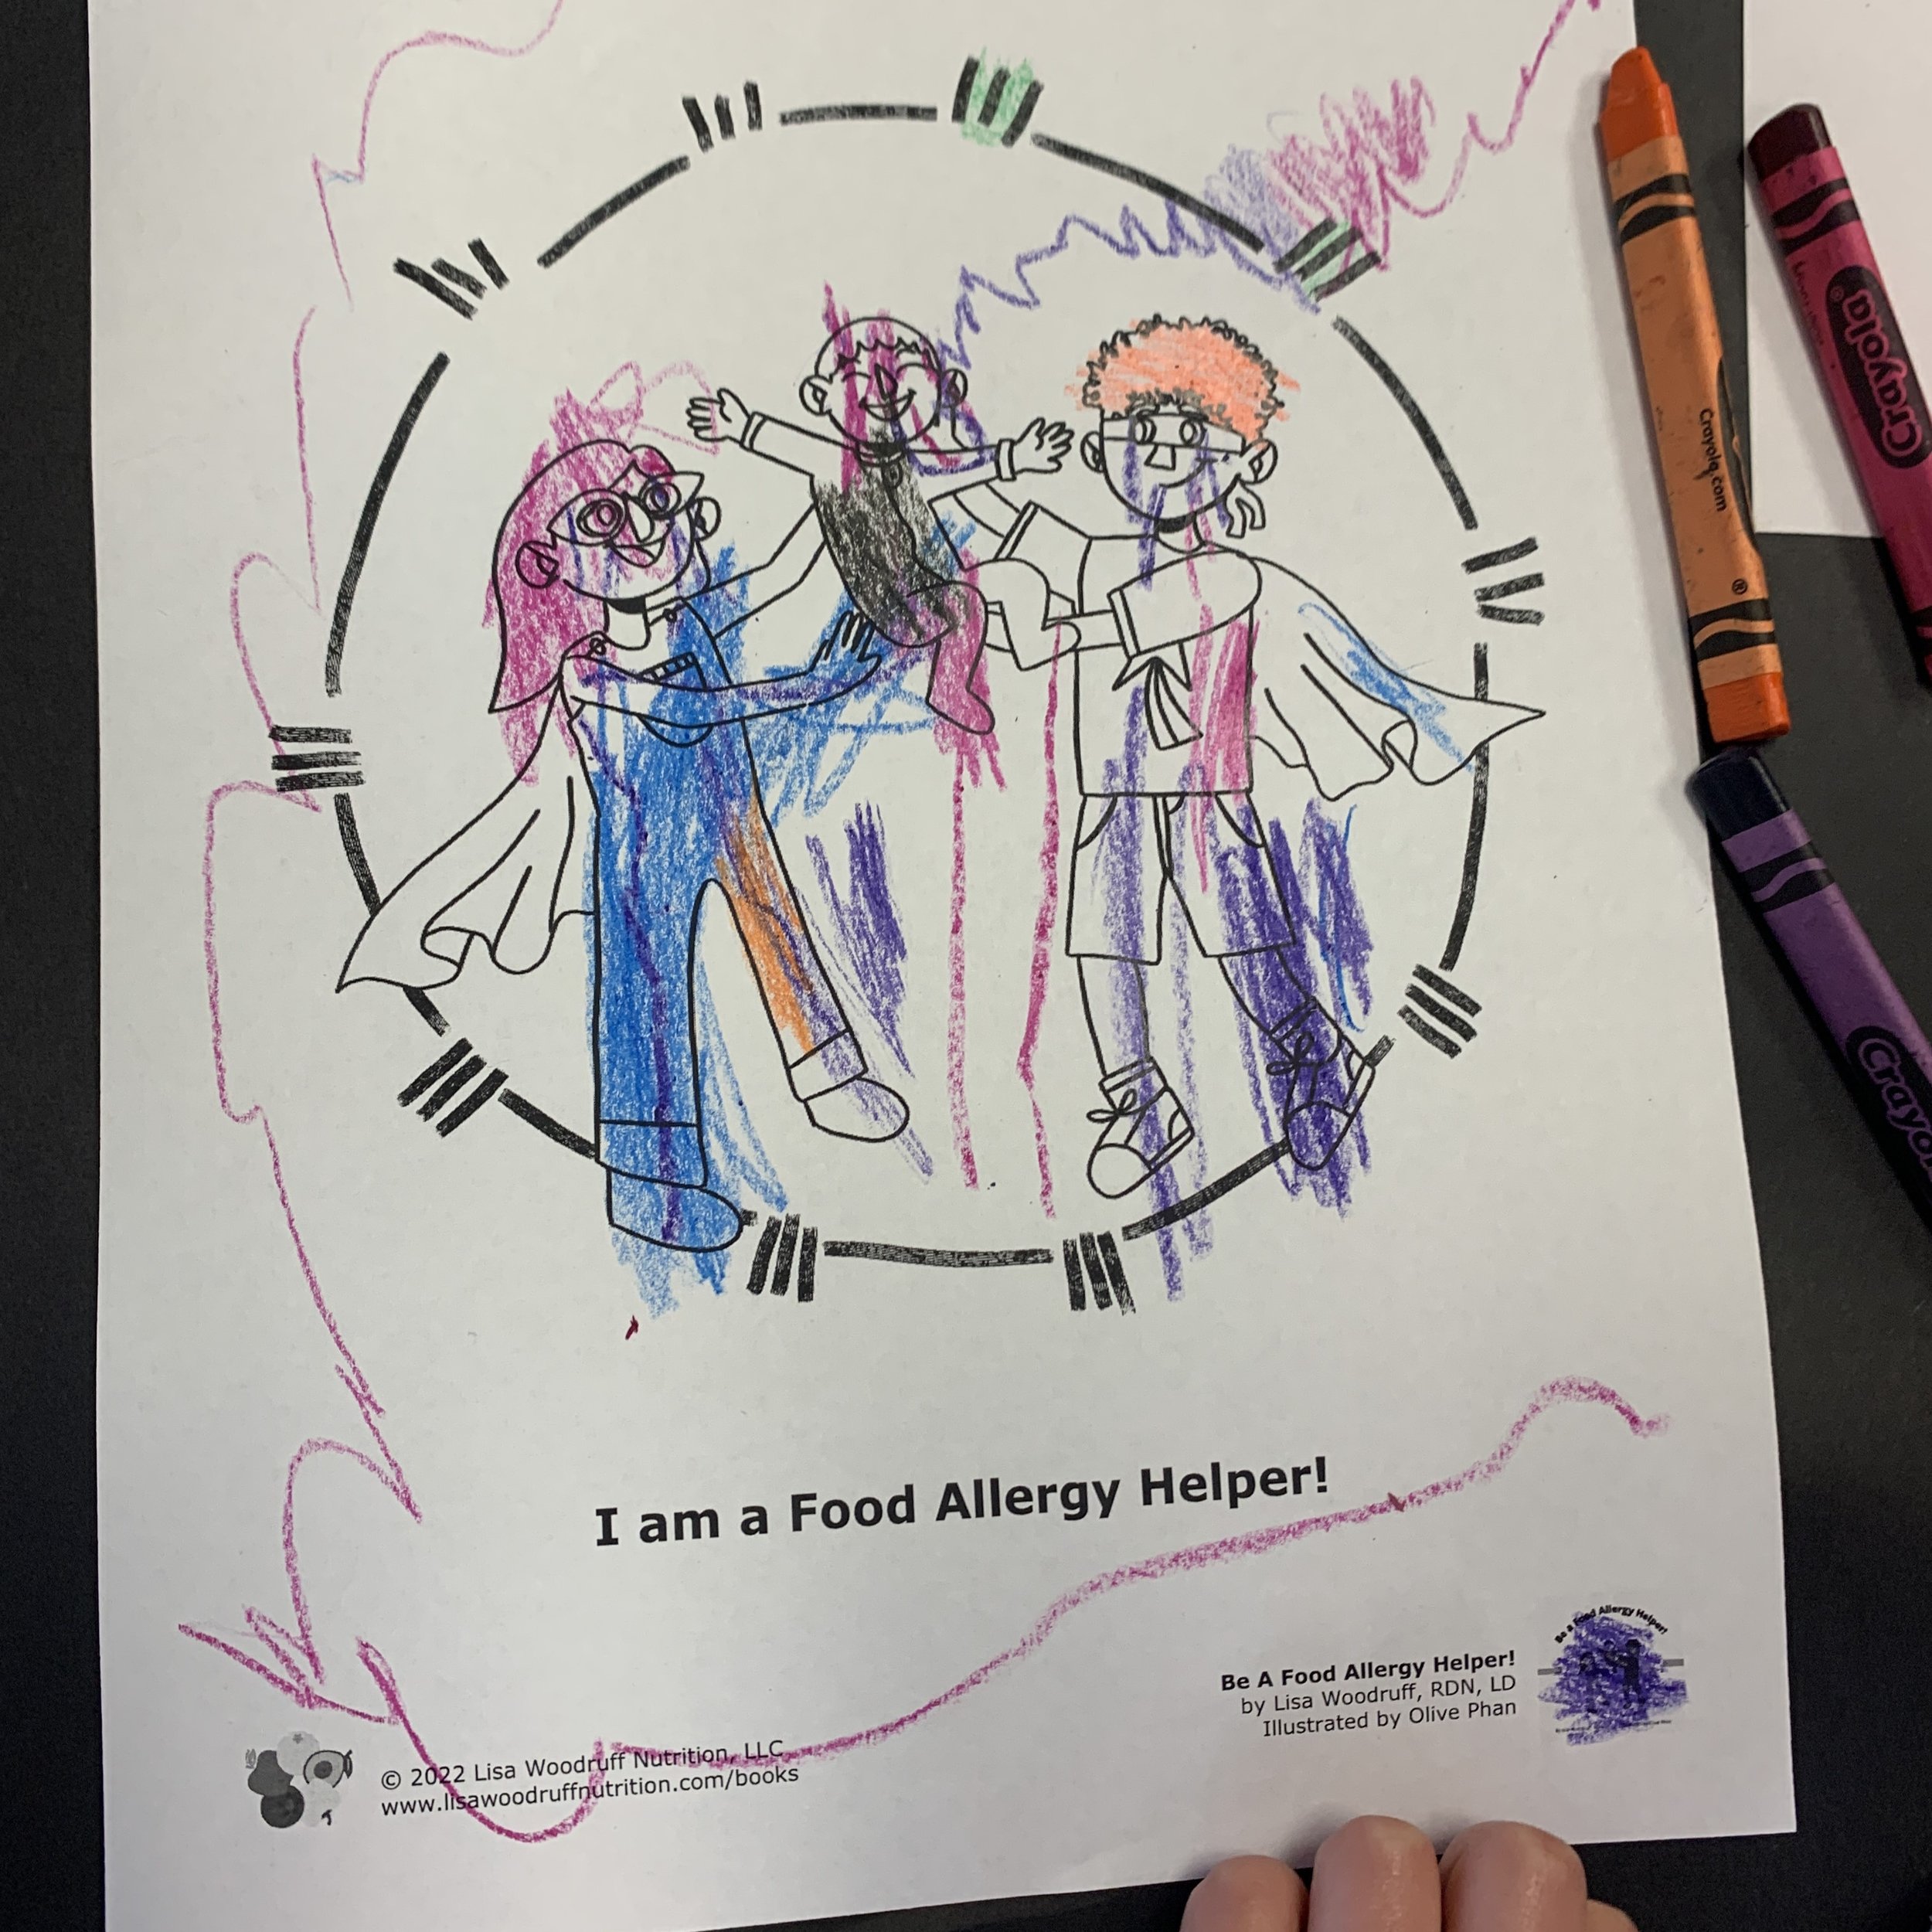 "I am a Food Allergy Helper!" Storytime friends had fun coloring in our Food Allergy Helpers from the book.